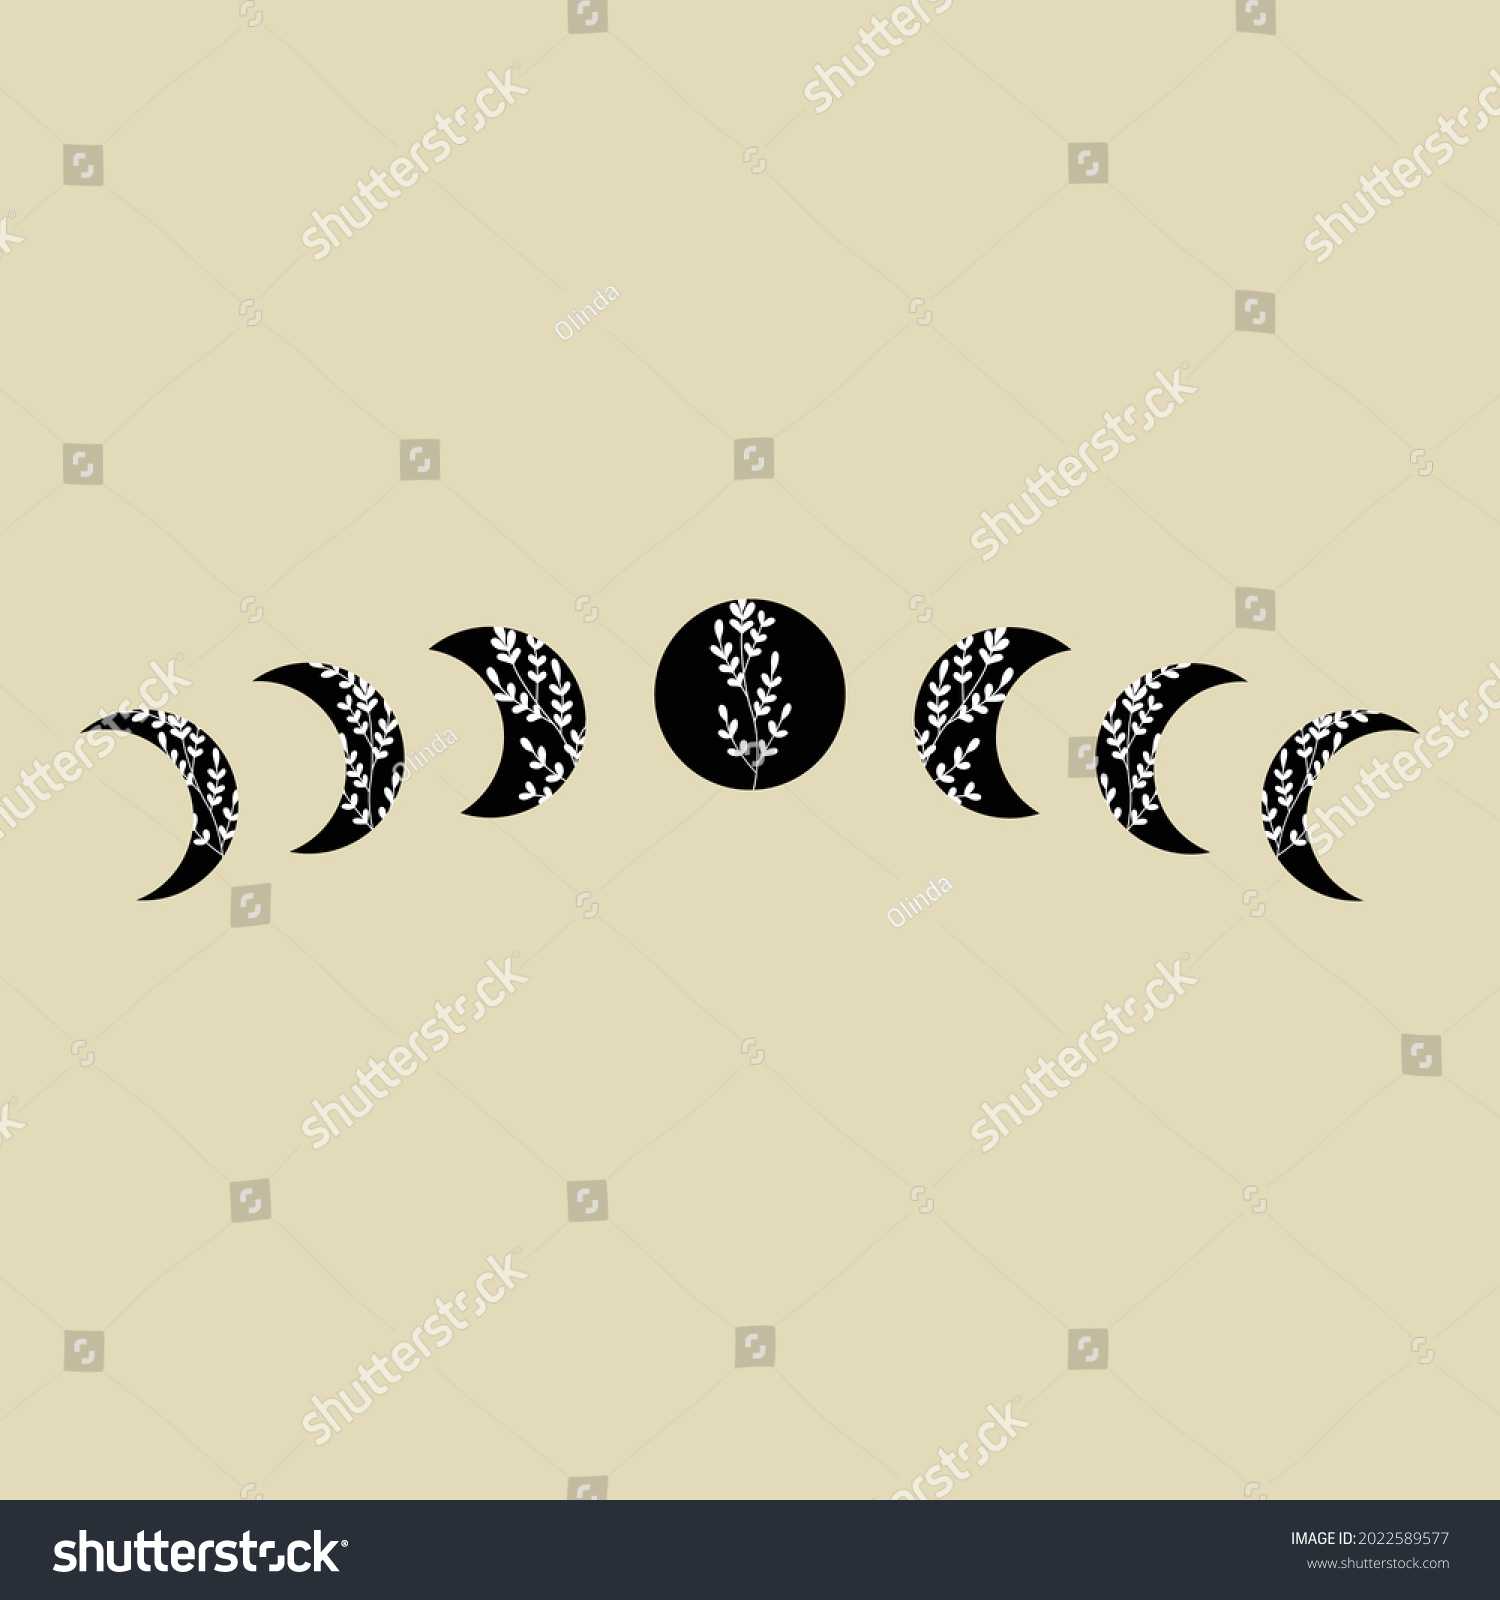 SVG of Moon phases with black crescent and full moon with white lace floral ornament. Design element for logos icons. Modern Boho style svg